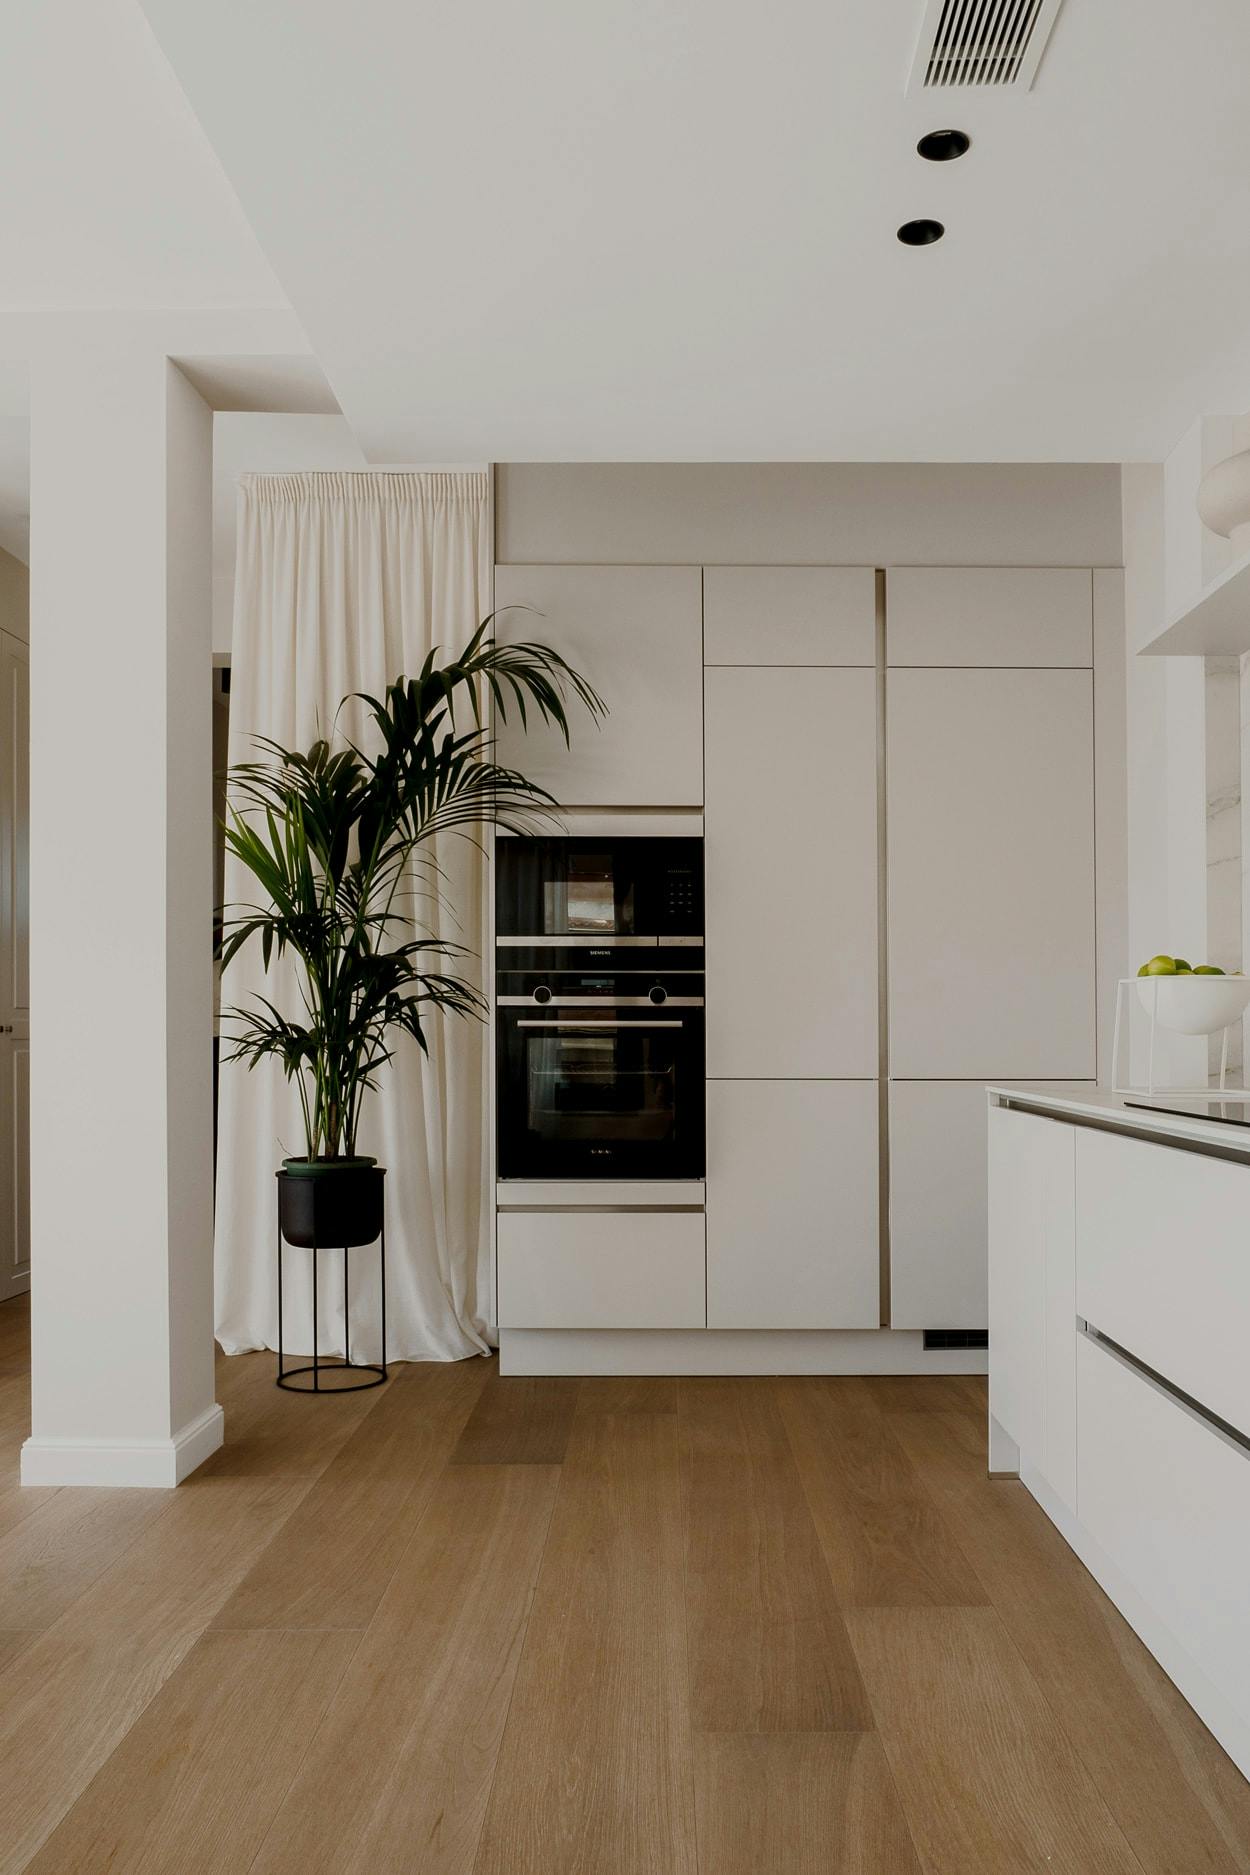 The image features a modern, white kitchen with a black countertop, a stainless steel oven, a microwave, a sink, and a potted plant.